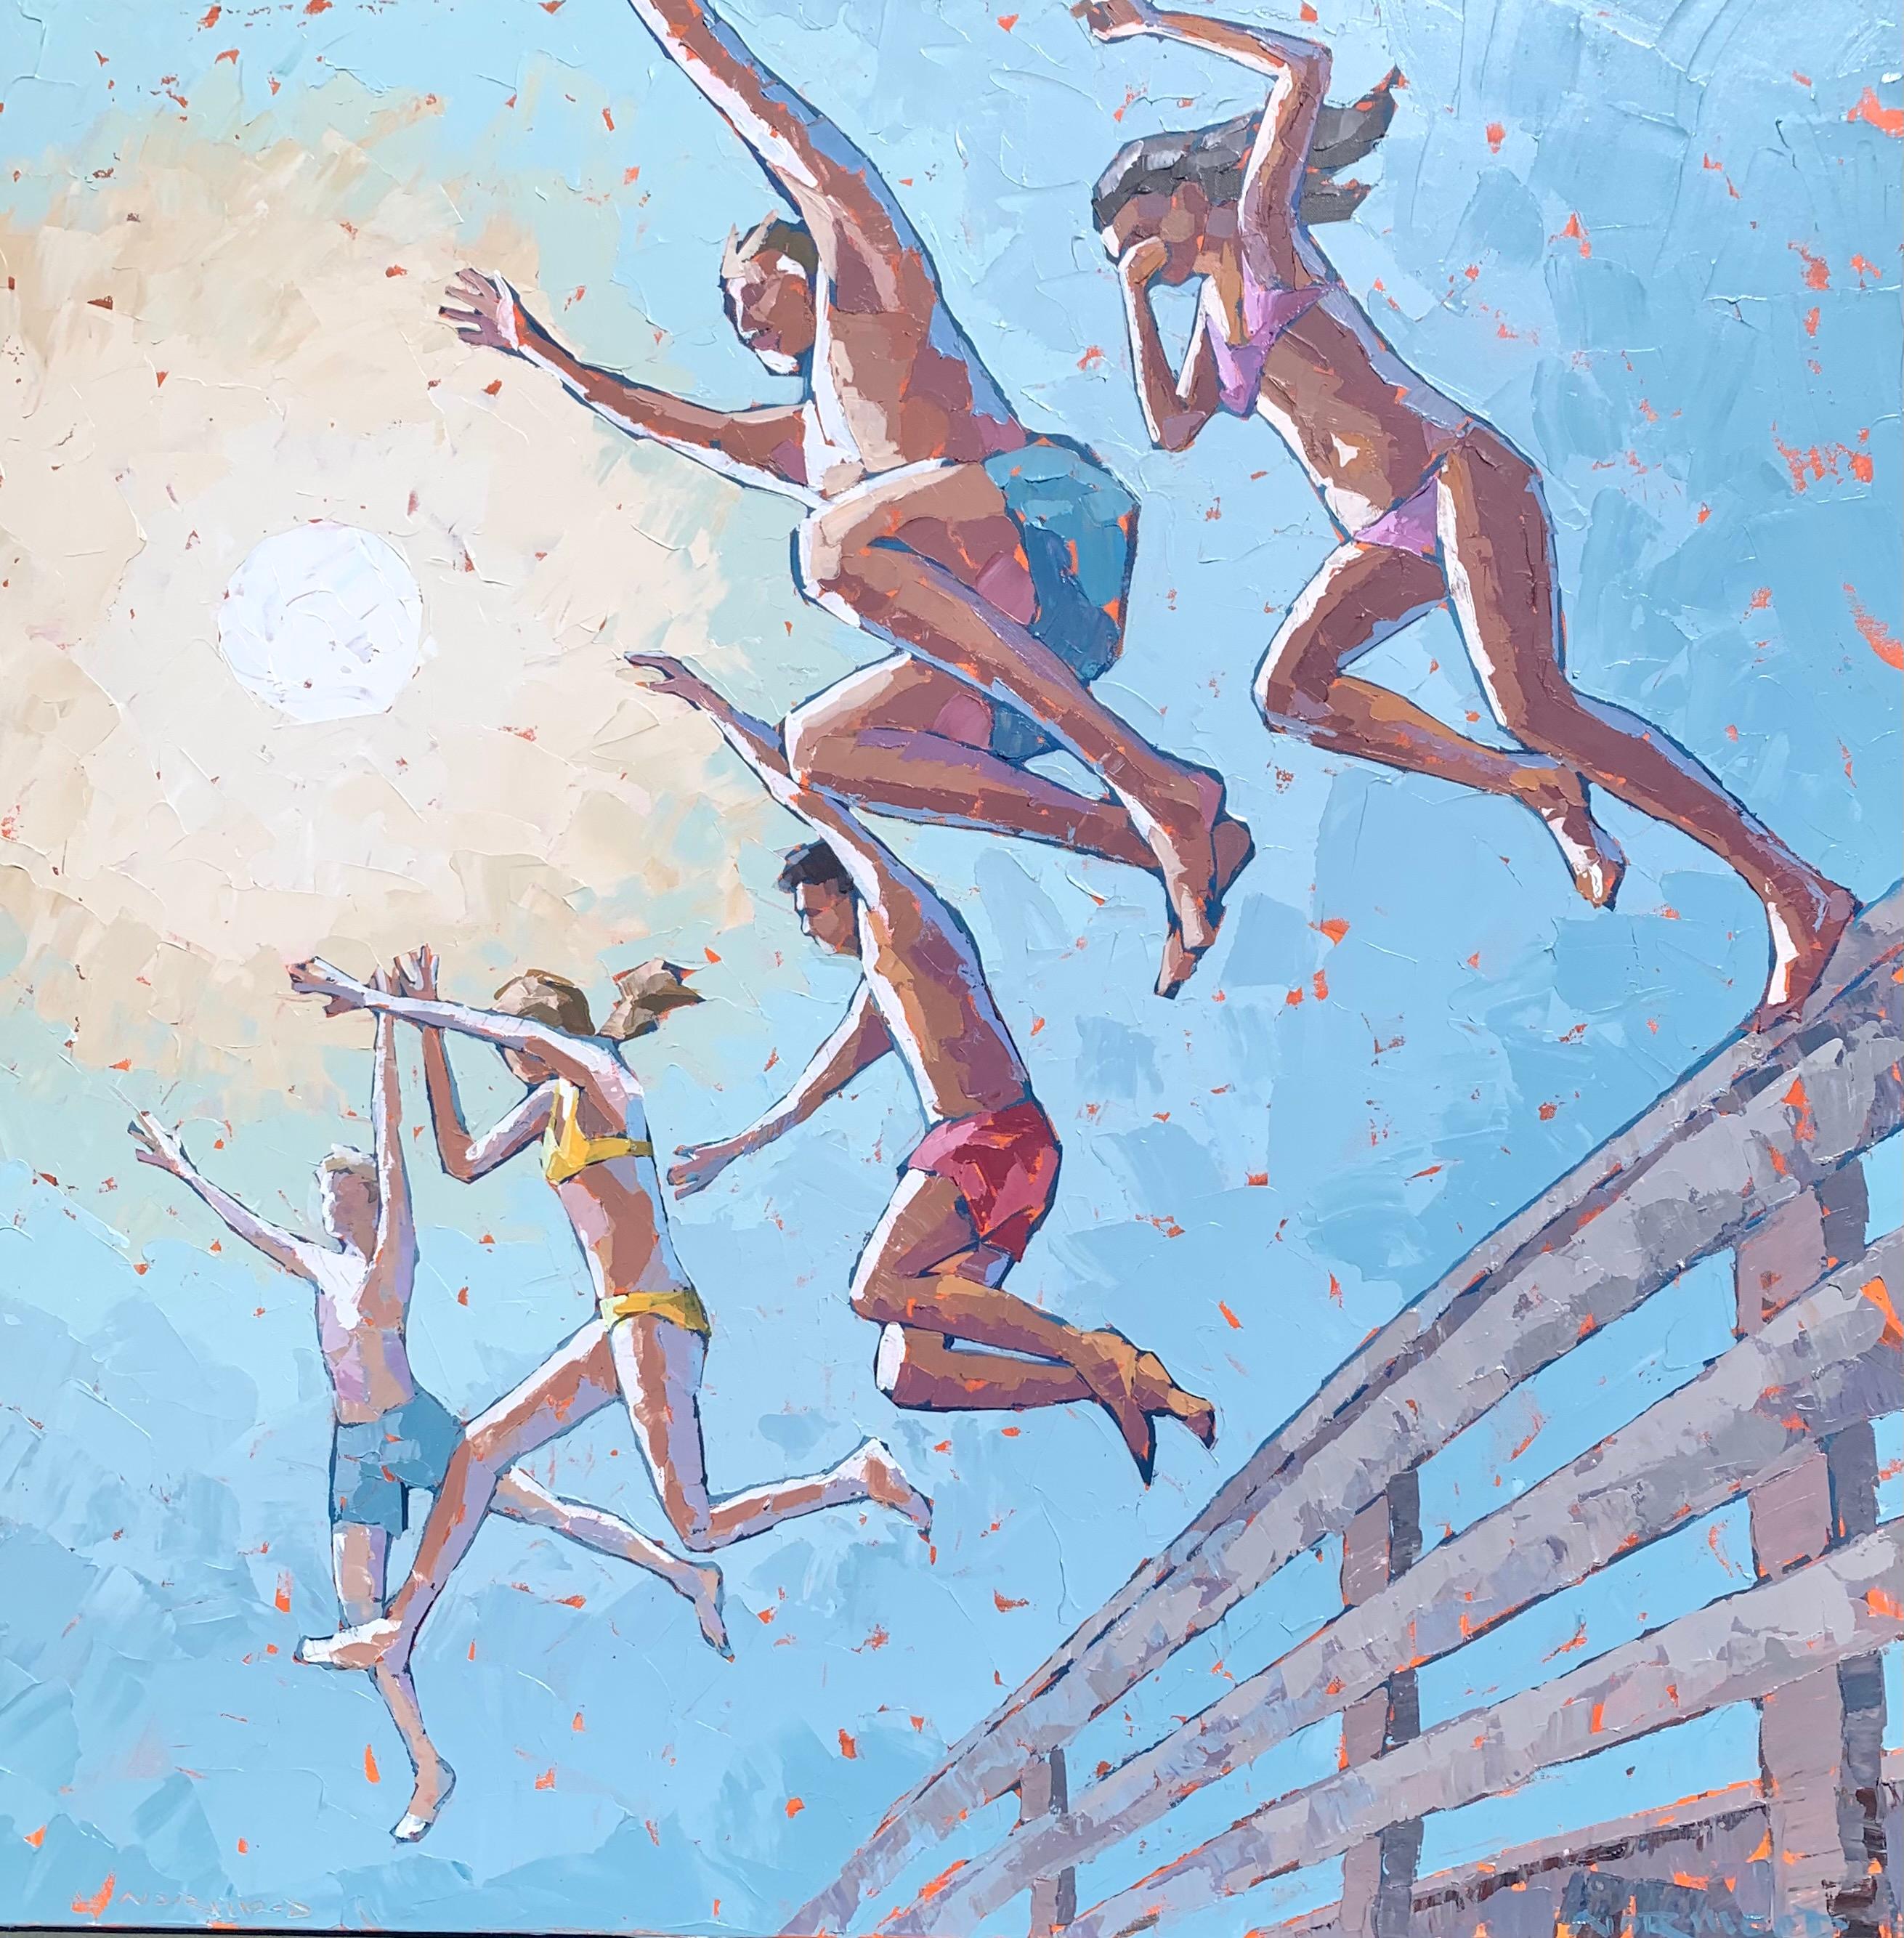 Paul Norwood Figurative Painting - "Letting Go" abstract acrylic painting of four kids in swimsuits jumping in sun